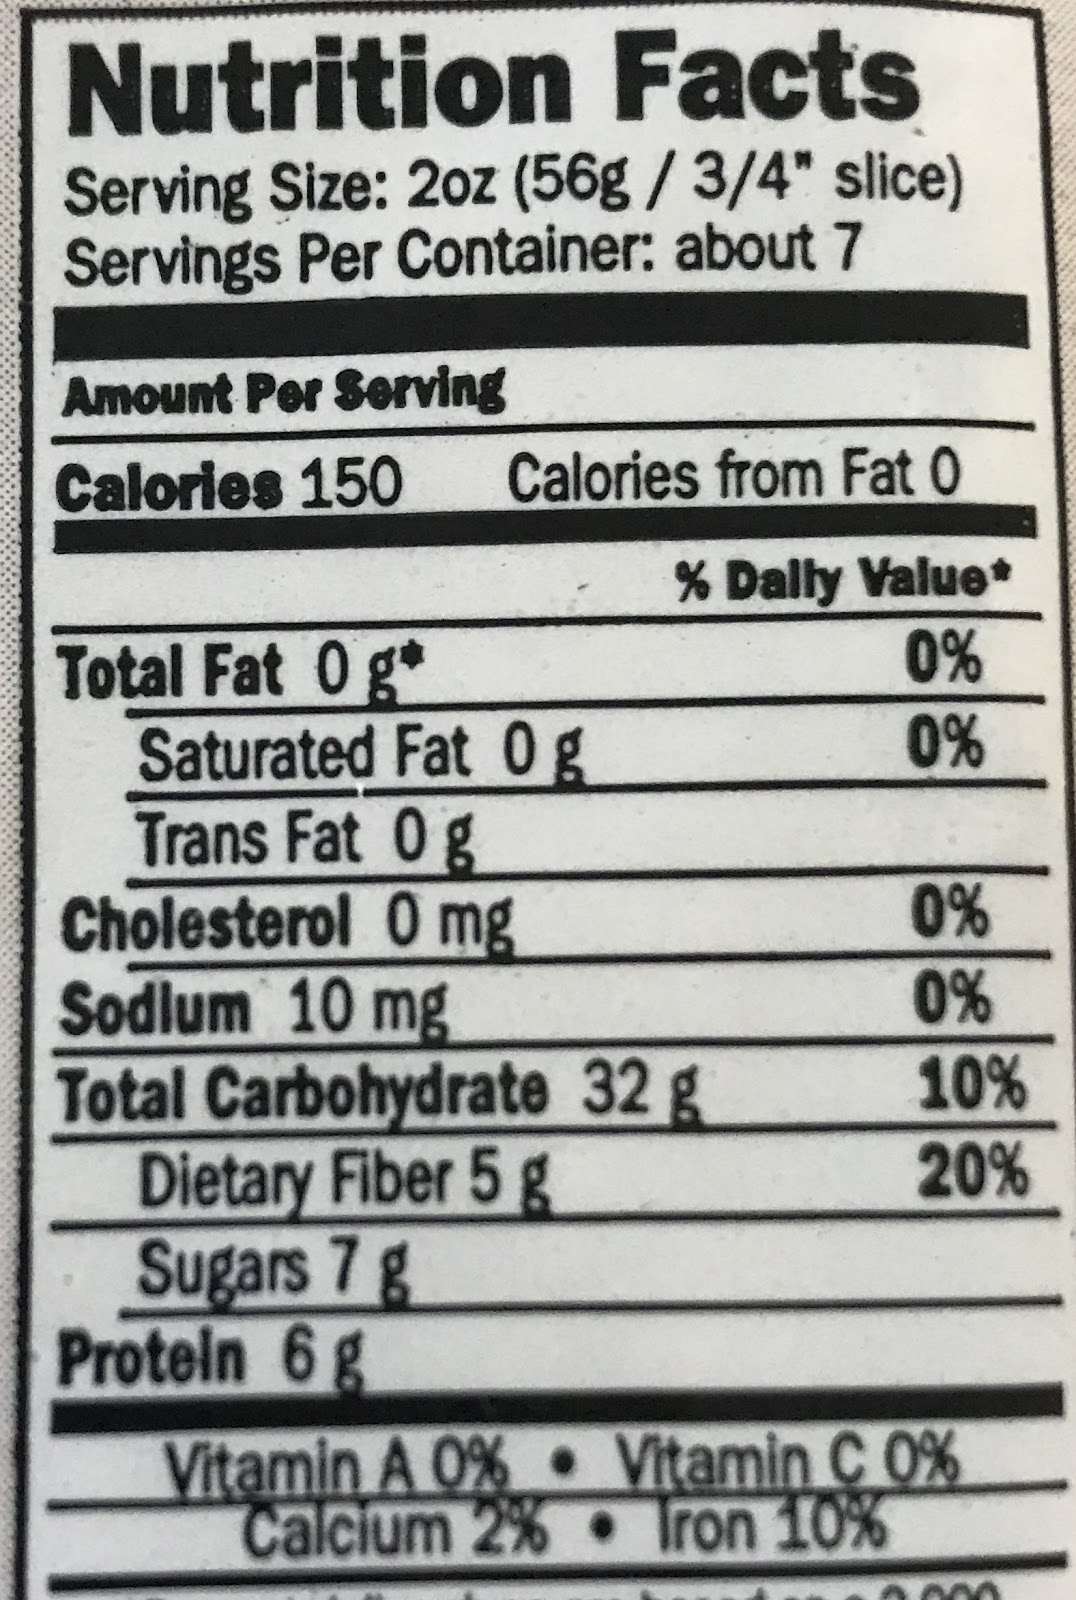 According to the Nutrition Facts, 2 oz. or 3/4